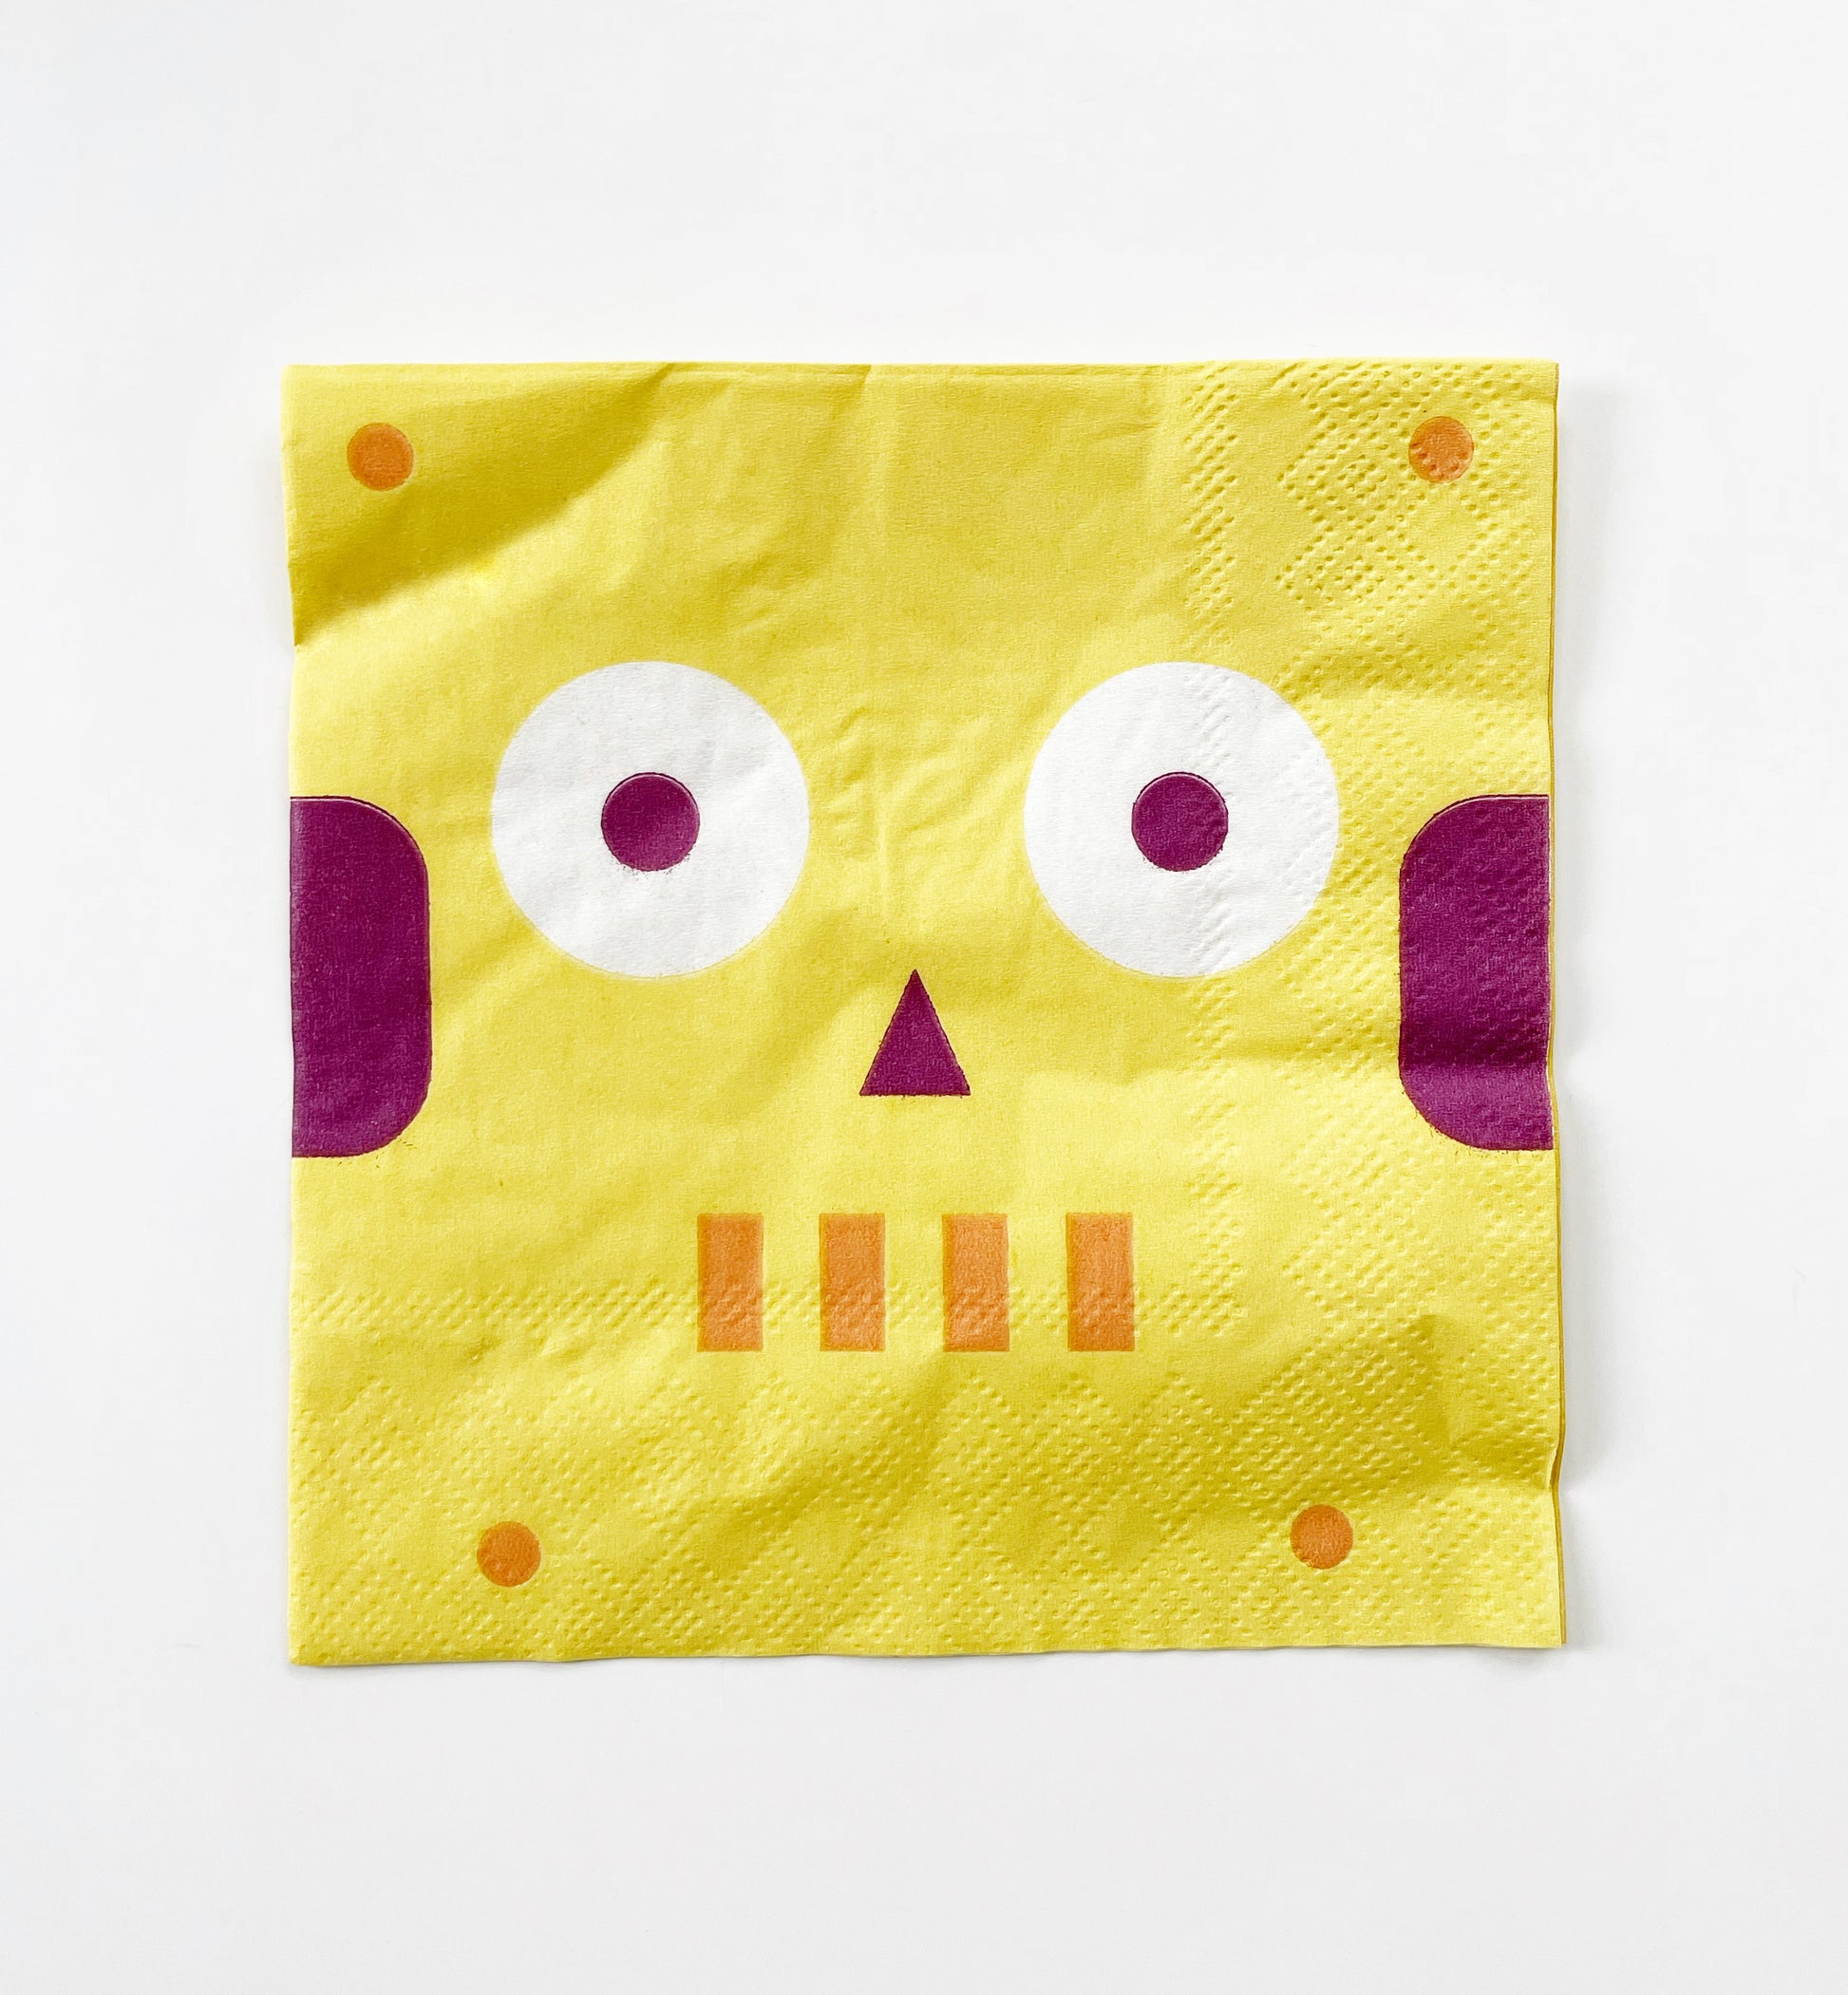 The paper party cocktail napkins feature a robot design in yellow, red and white.